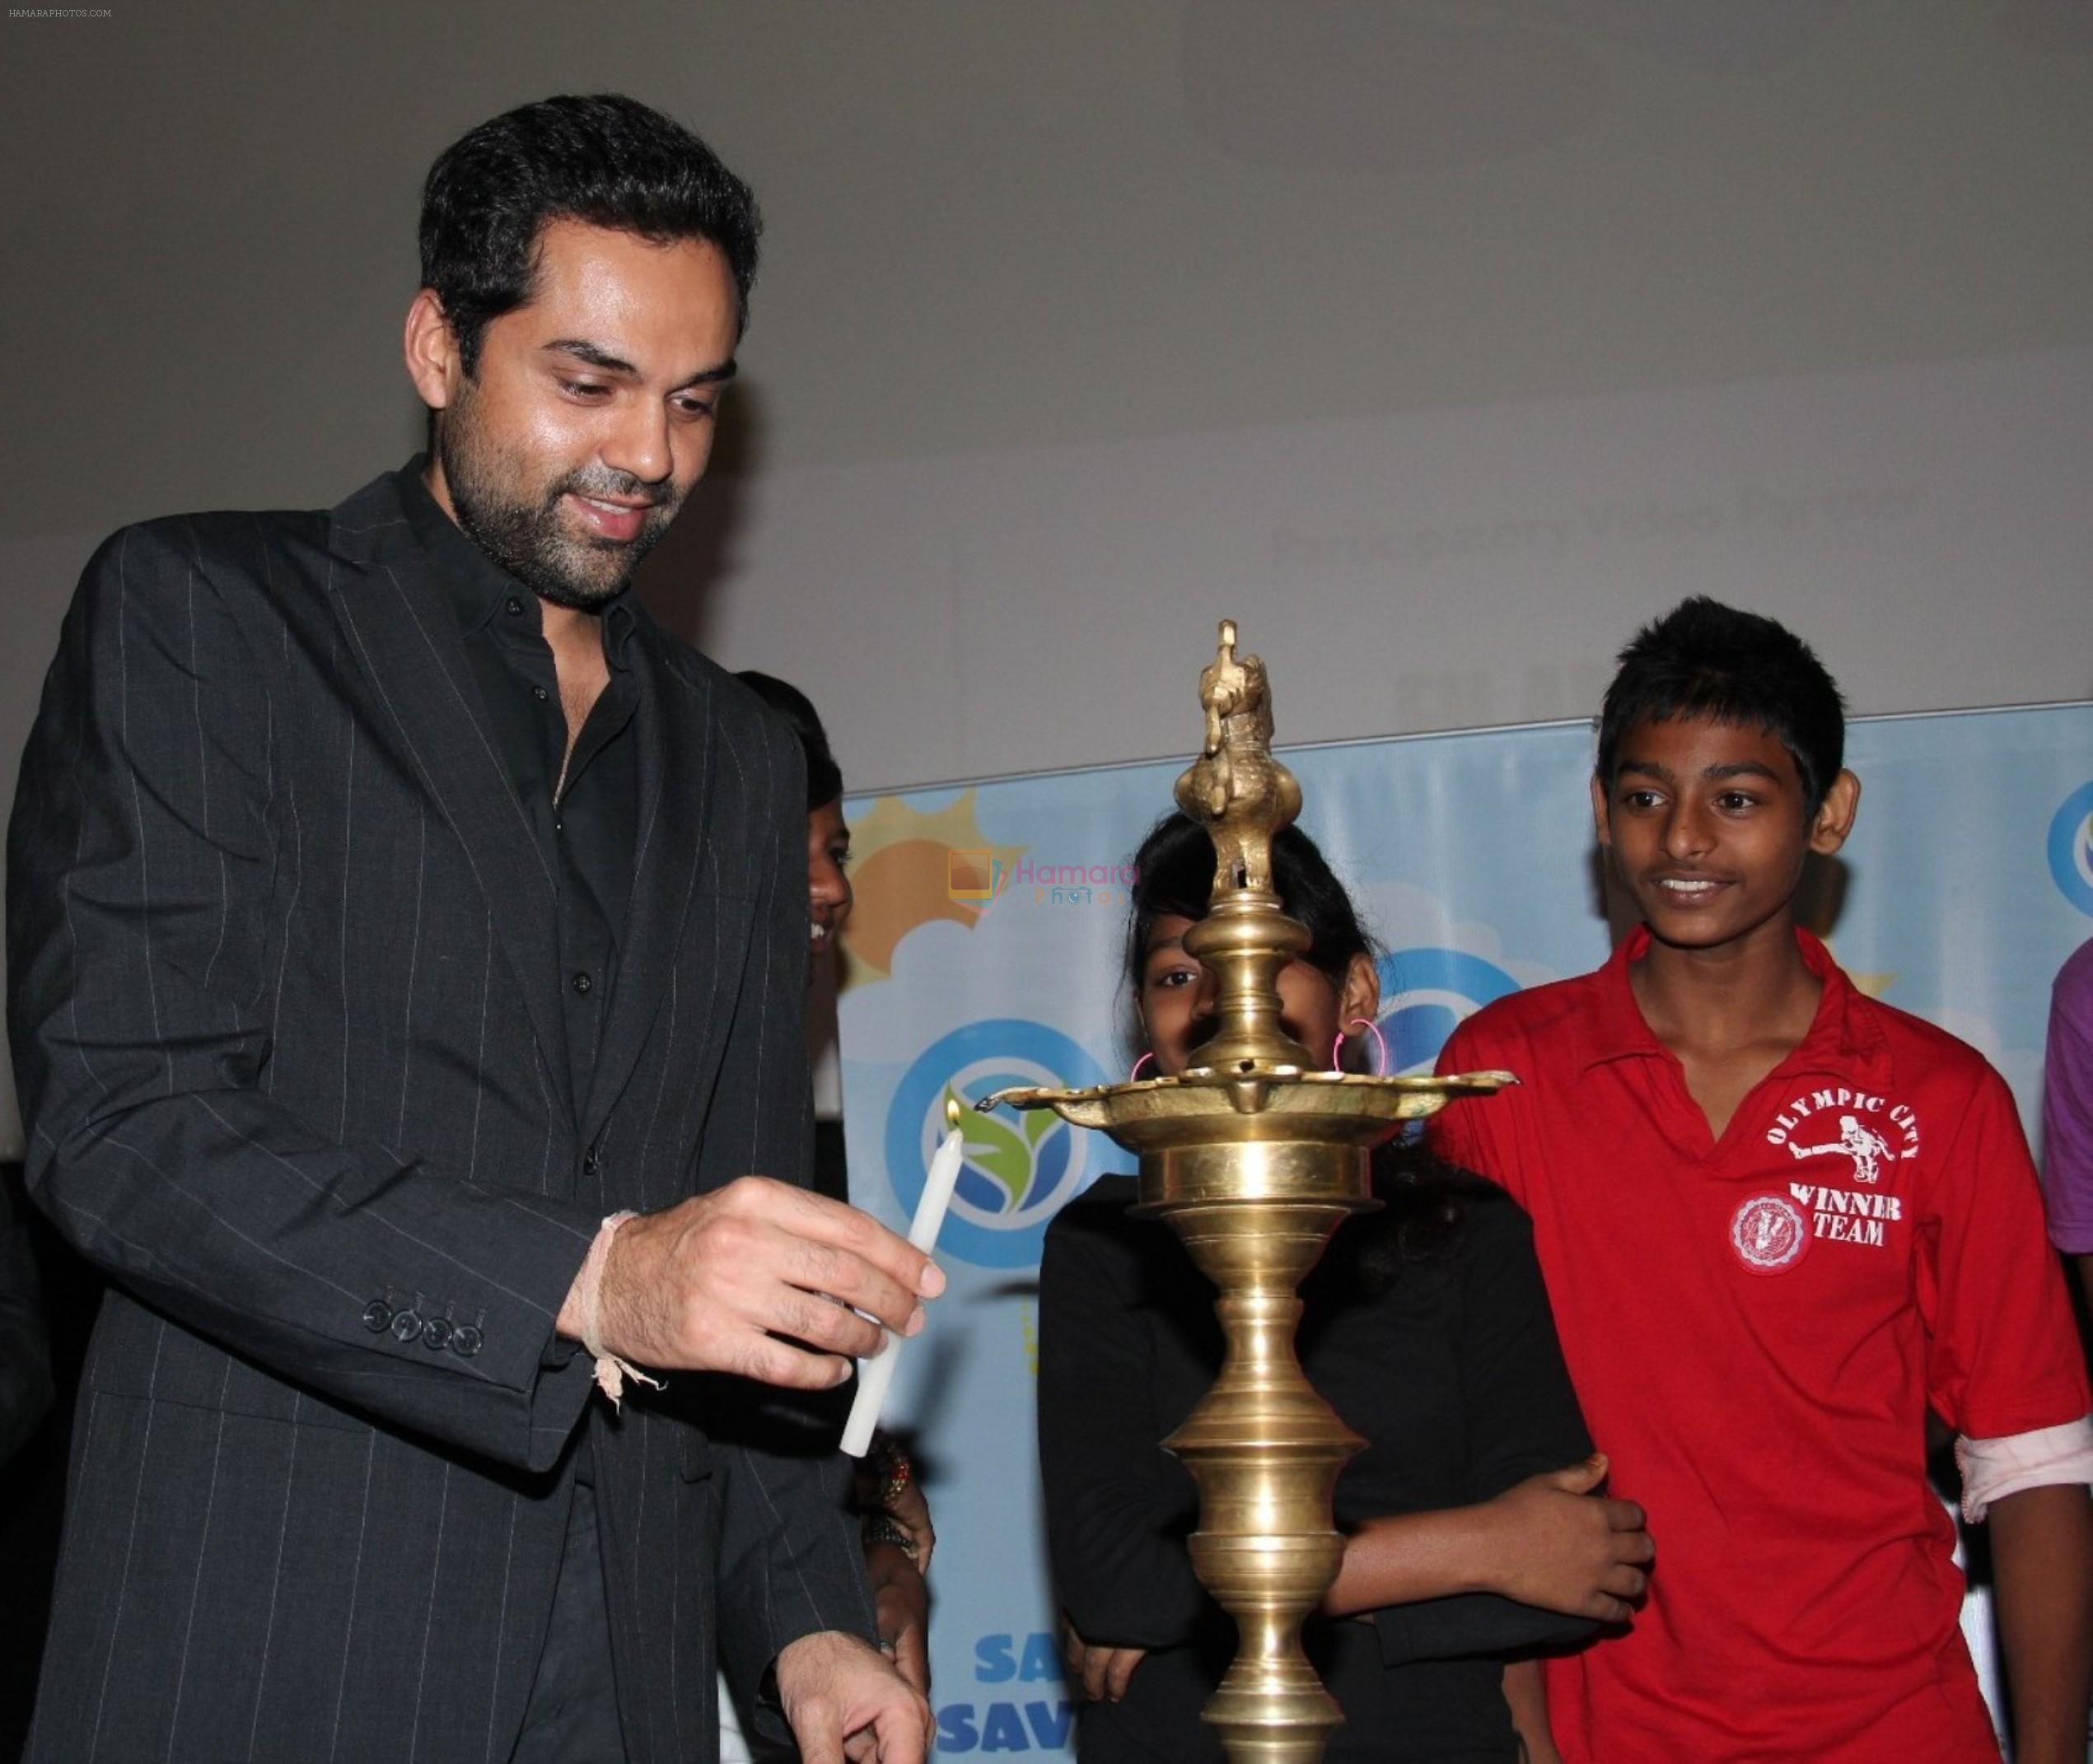 Abhay Deol launched Disney and PVR Nest _My City My Parks initiative_ in Mumbai on 15th Nov 2011